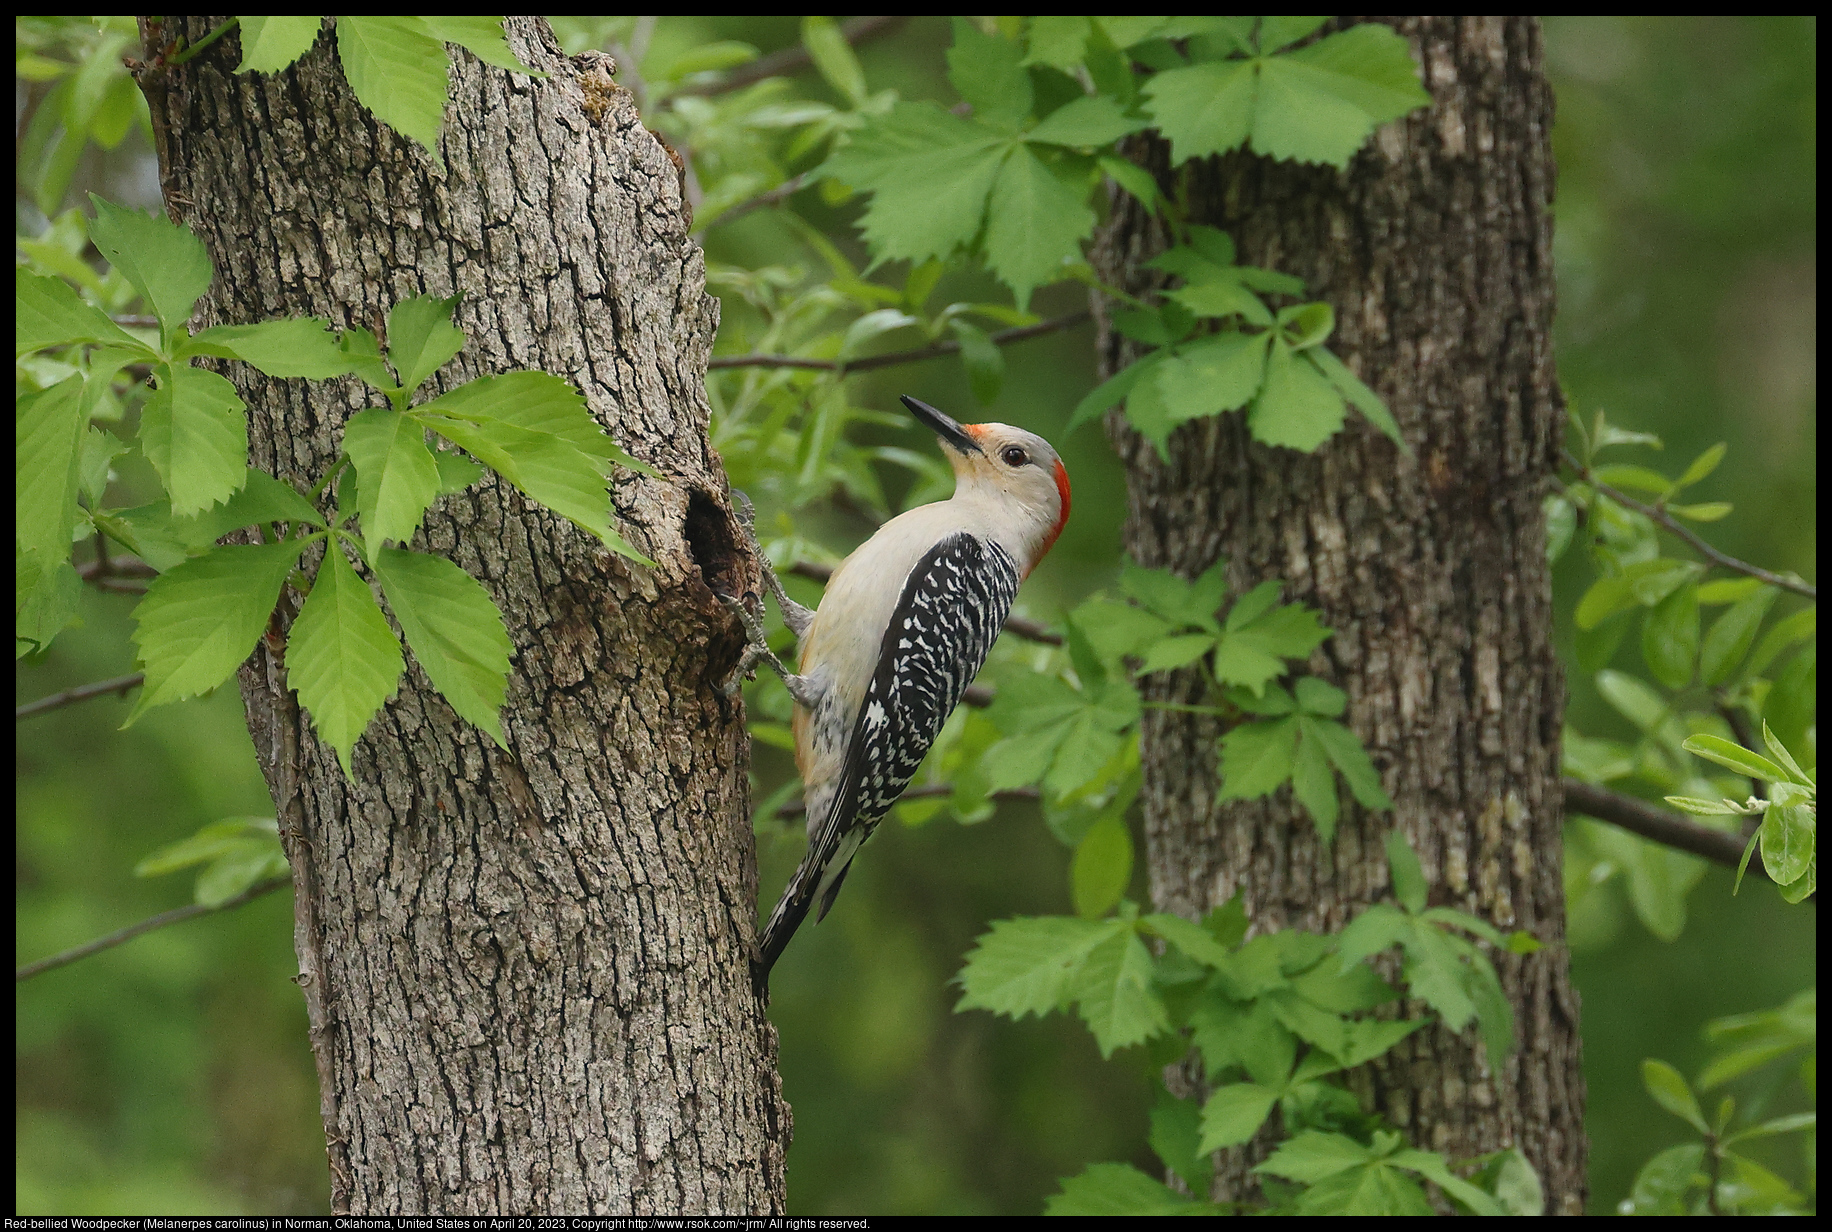 Red-bellied Woodpecker (Melanerpes carolinus) in Norman, Oklahoma, United States on April 20, 2023